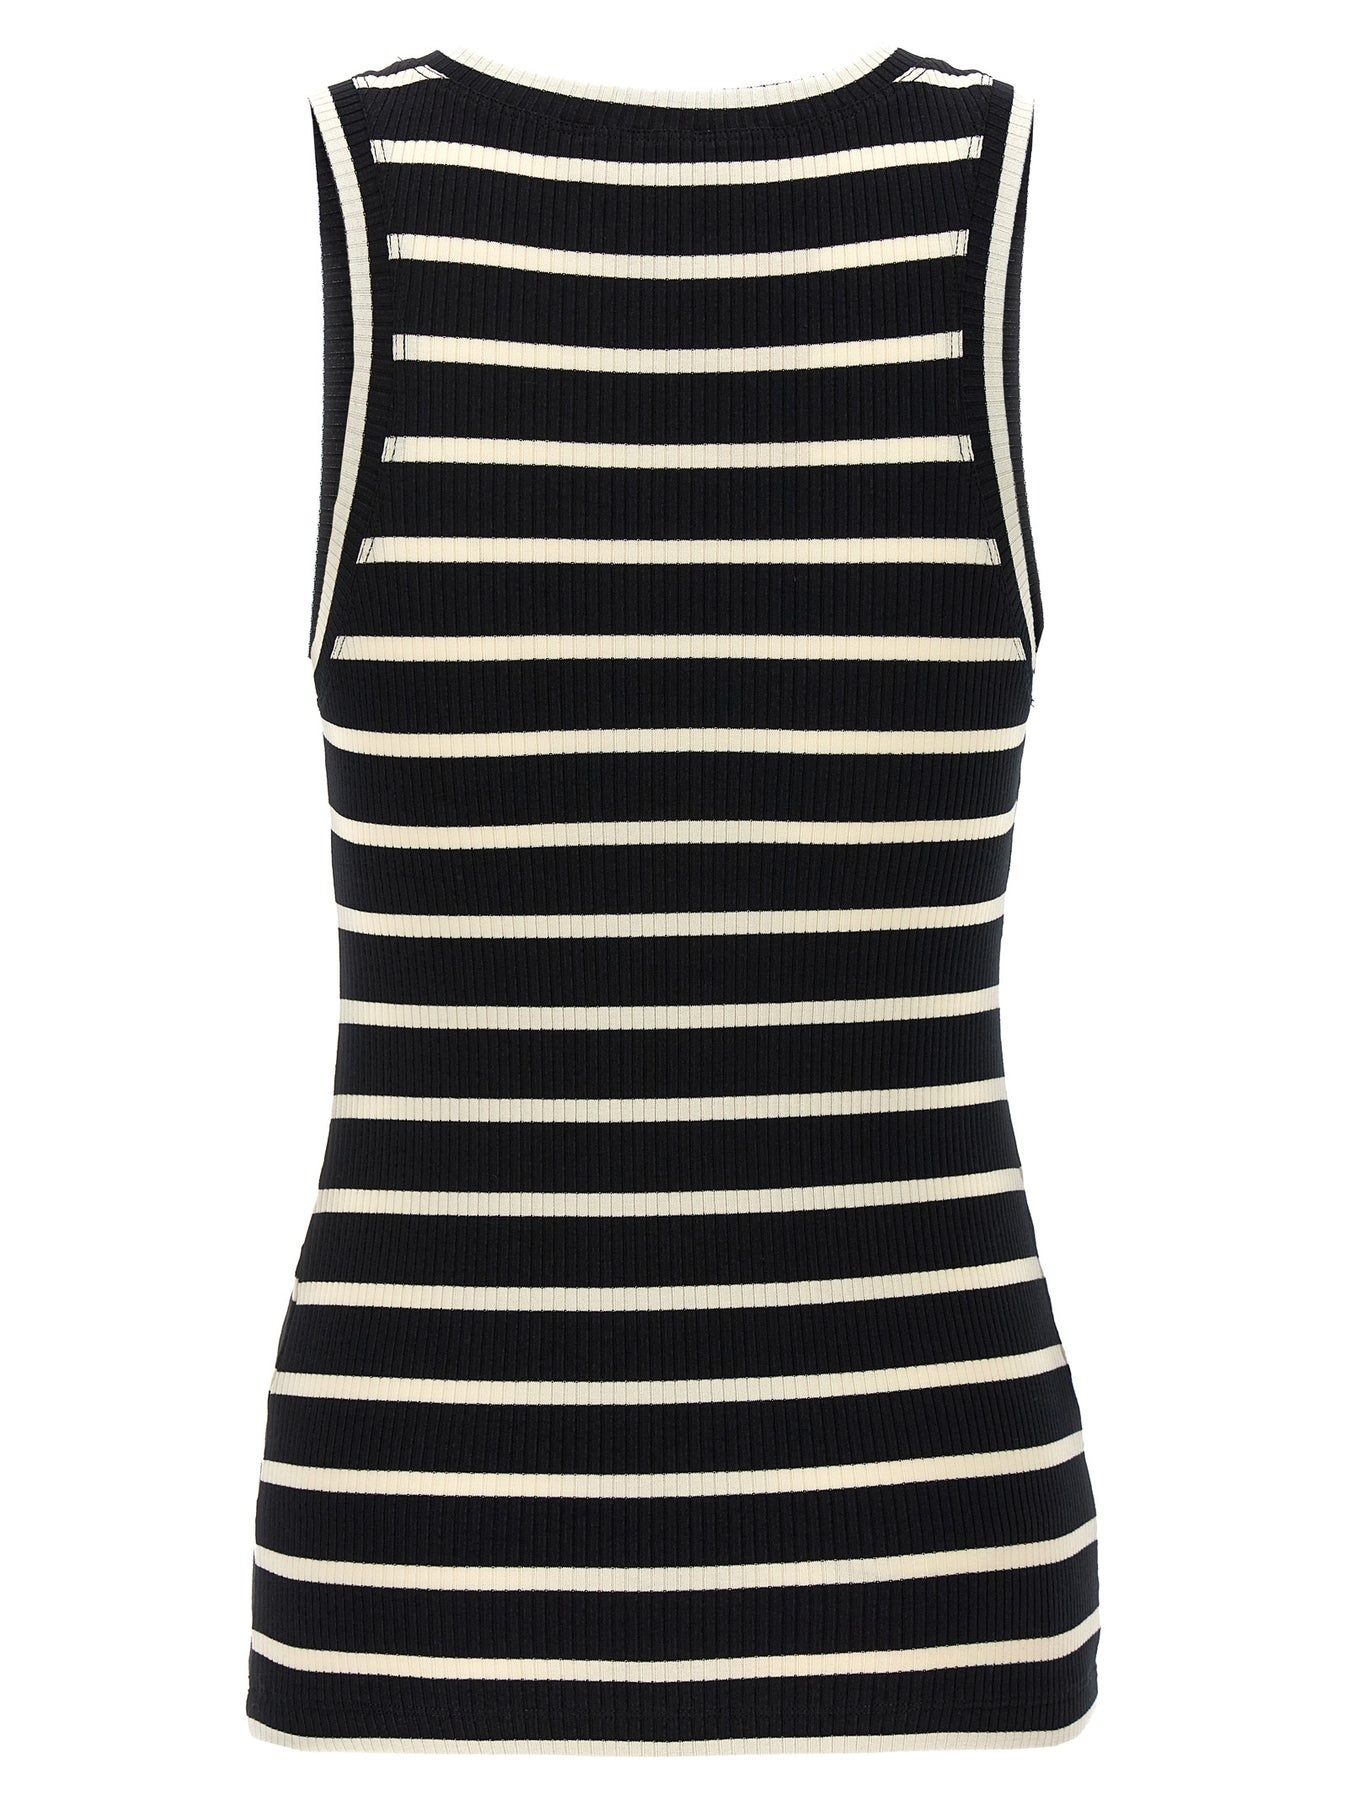 Striped Ribbed Top Tops White/Black - 2